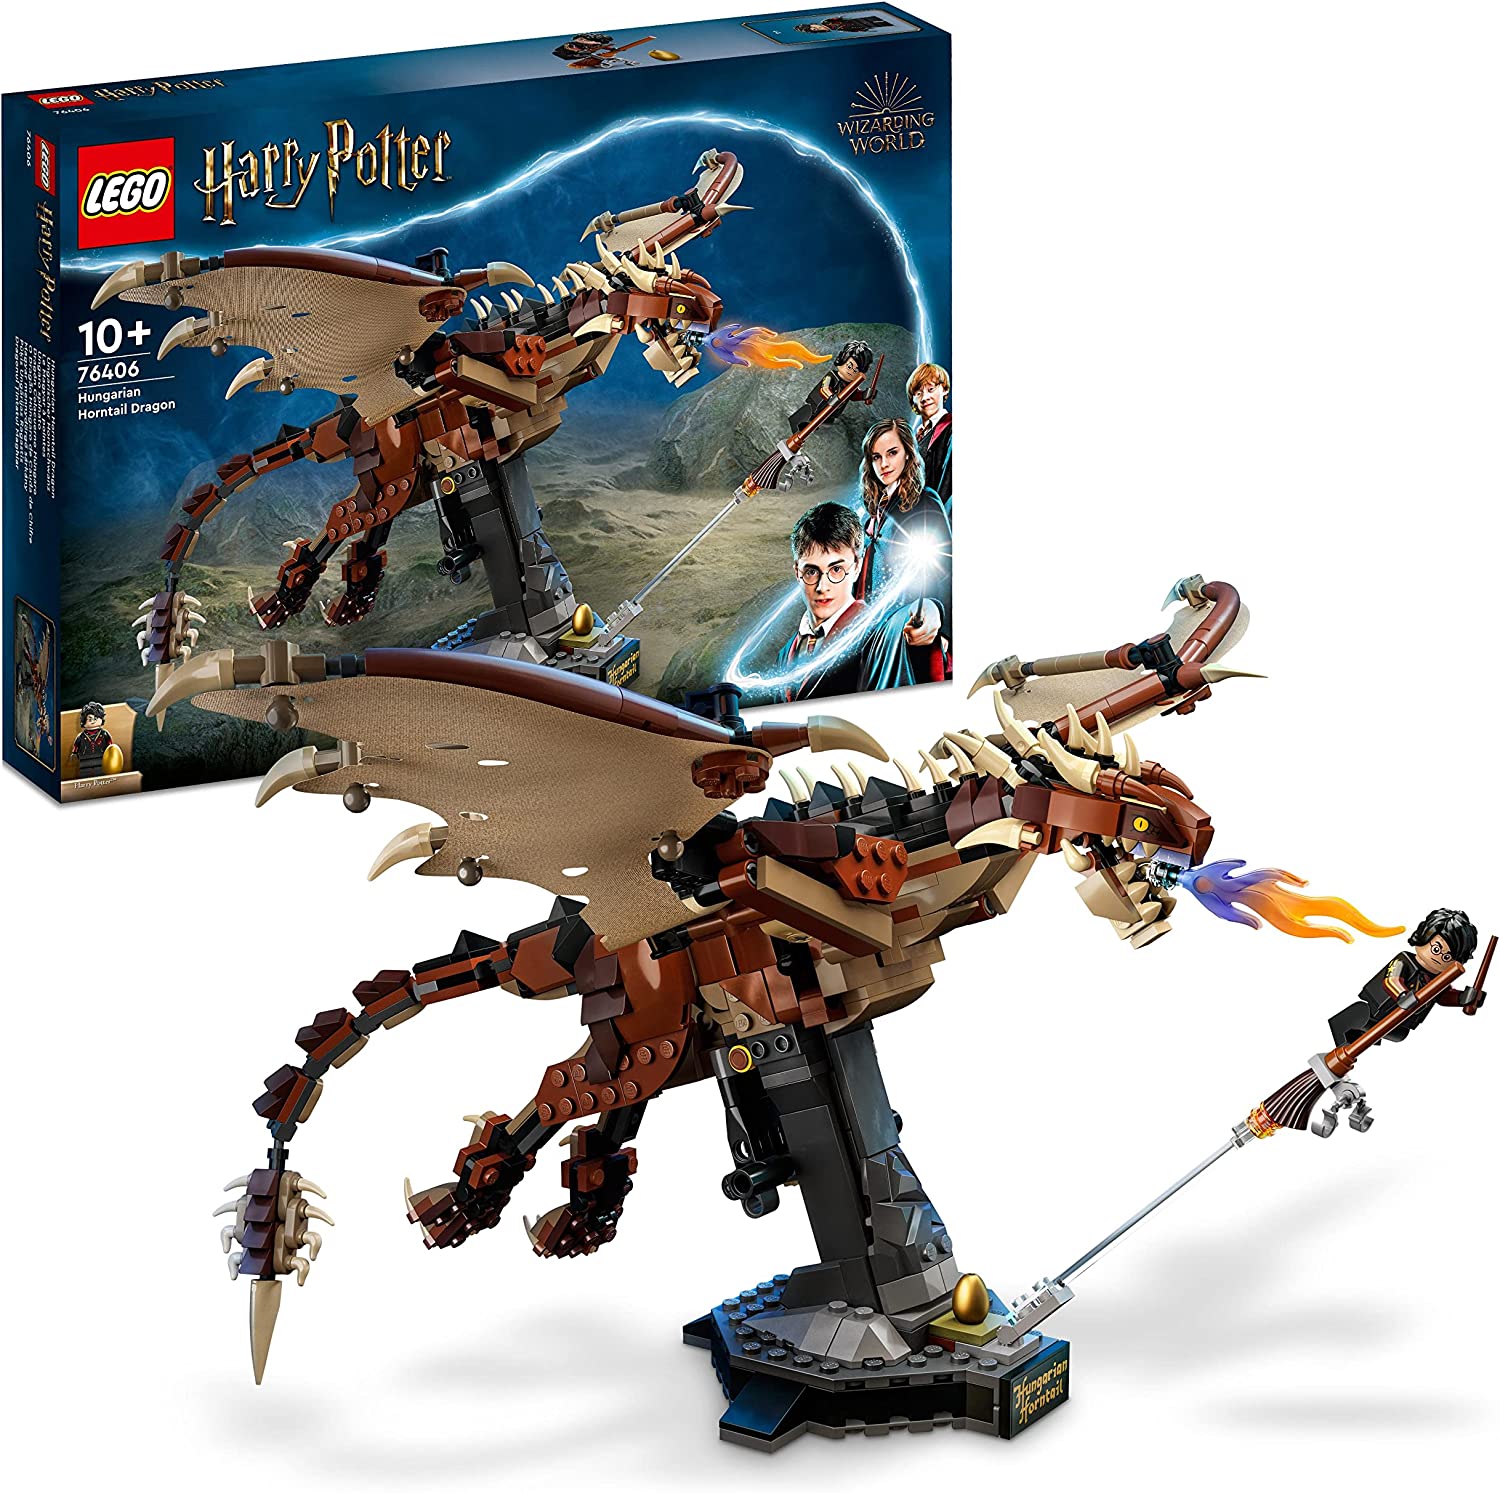 LEGO 76406 Harry Potter Hungarian Horn Tail Dragon Toy Figure from the Wizarding World Fan Item Room Decoration